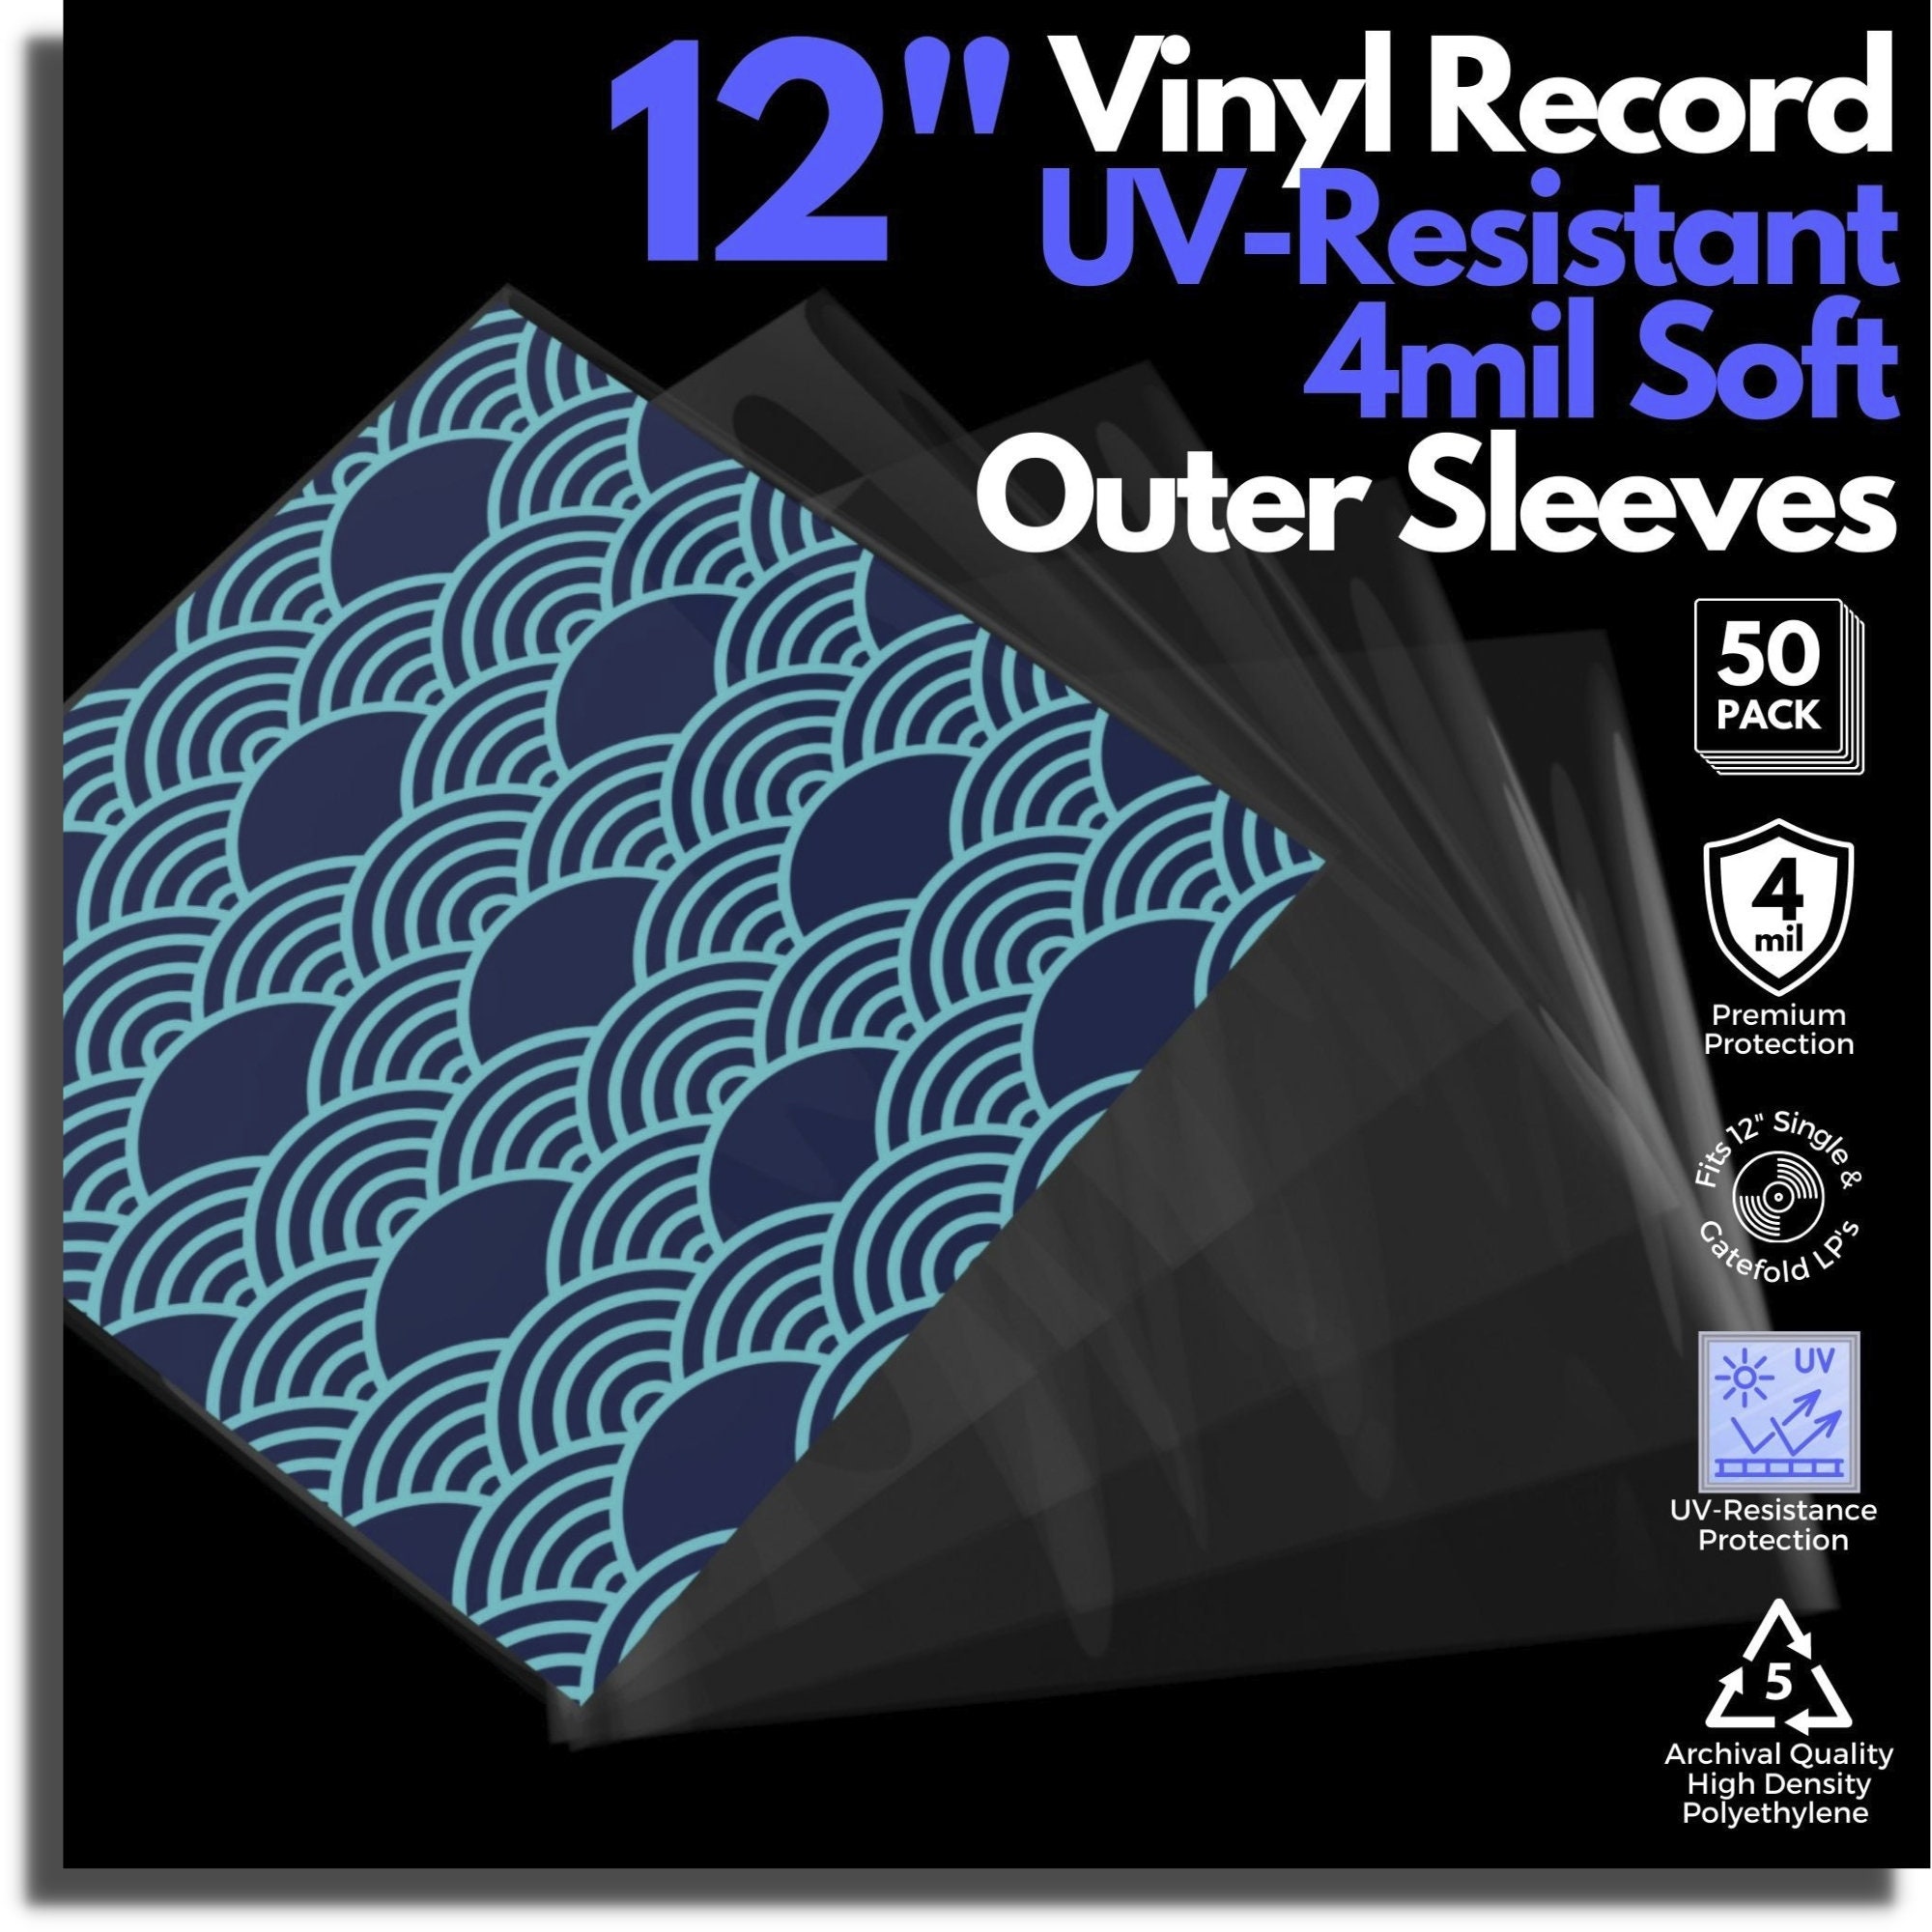 CheckOutStore 3 Ply Rice Paper Archival Quality Anti Static Record for 12  LP Vinyl 33 RPM (Inner Sleeves)